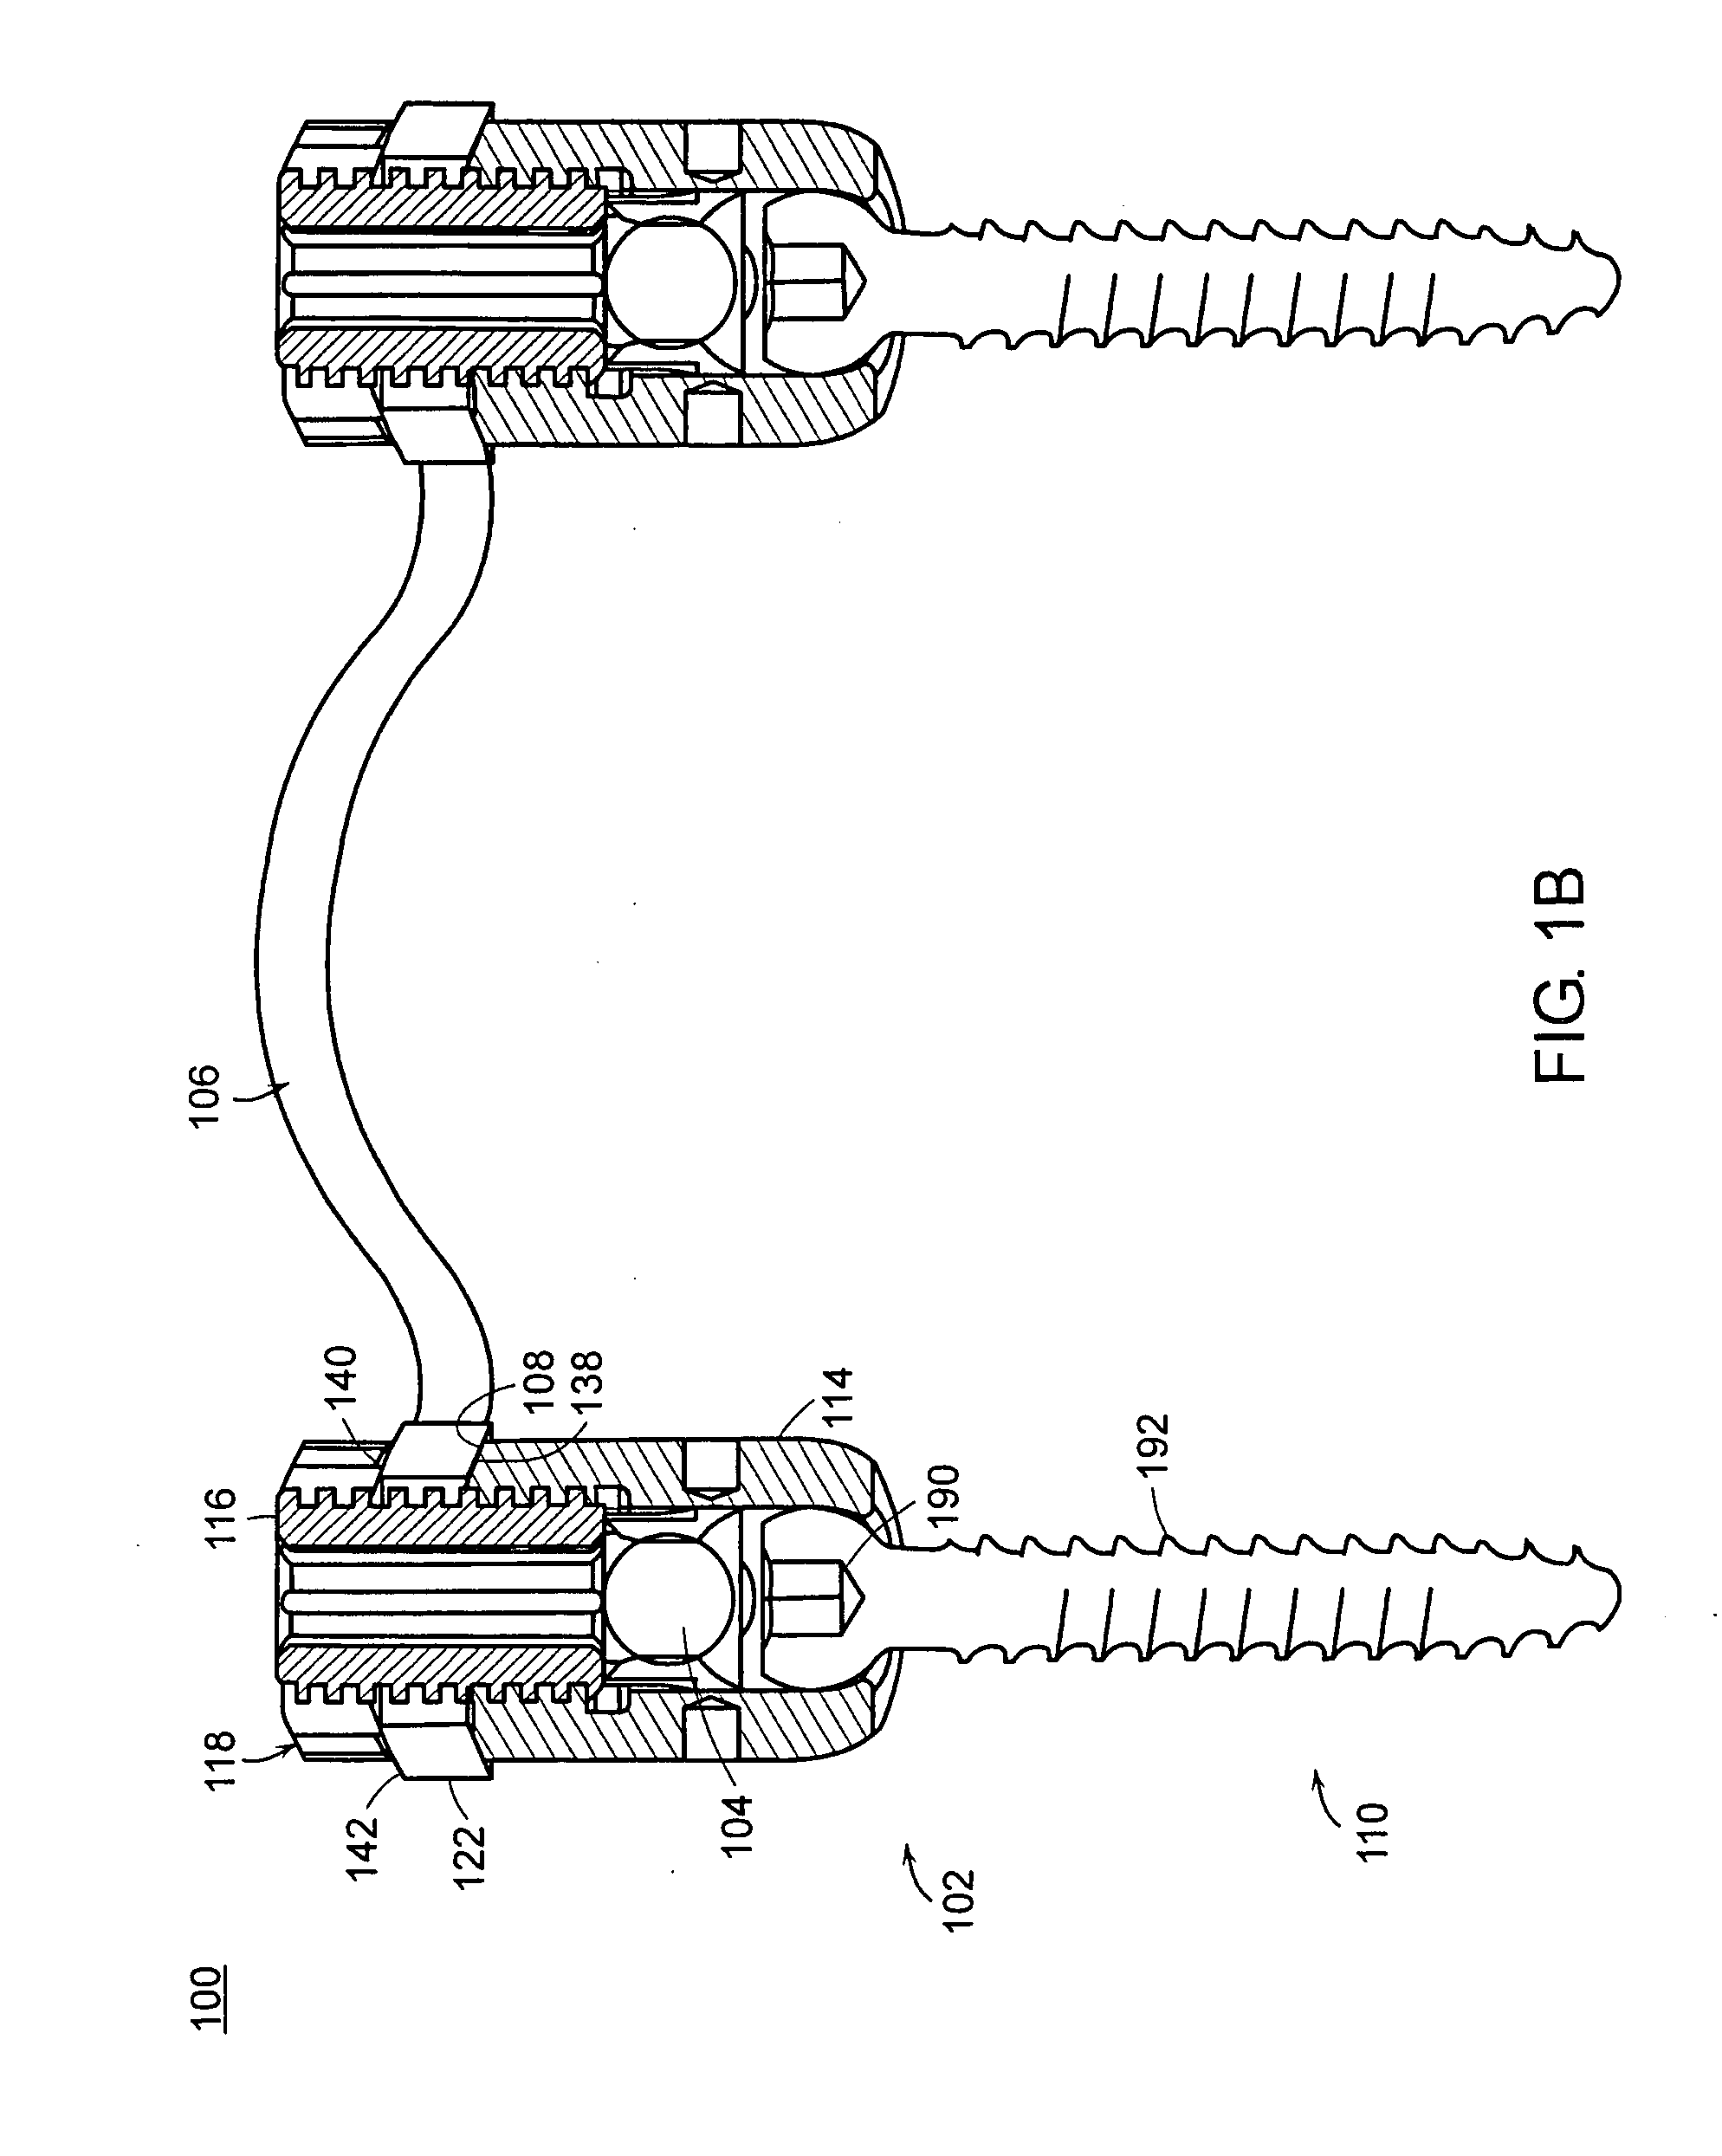 Head-to-head connector spinal fixation system